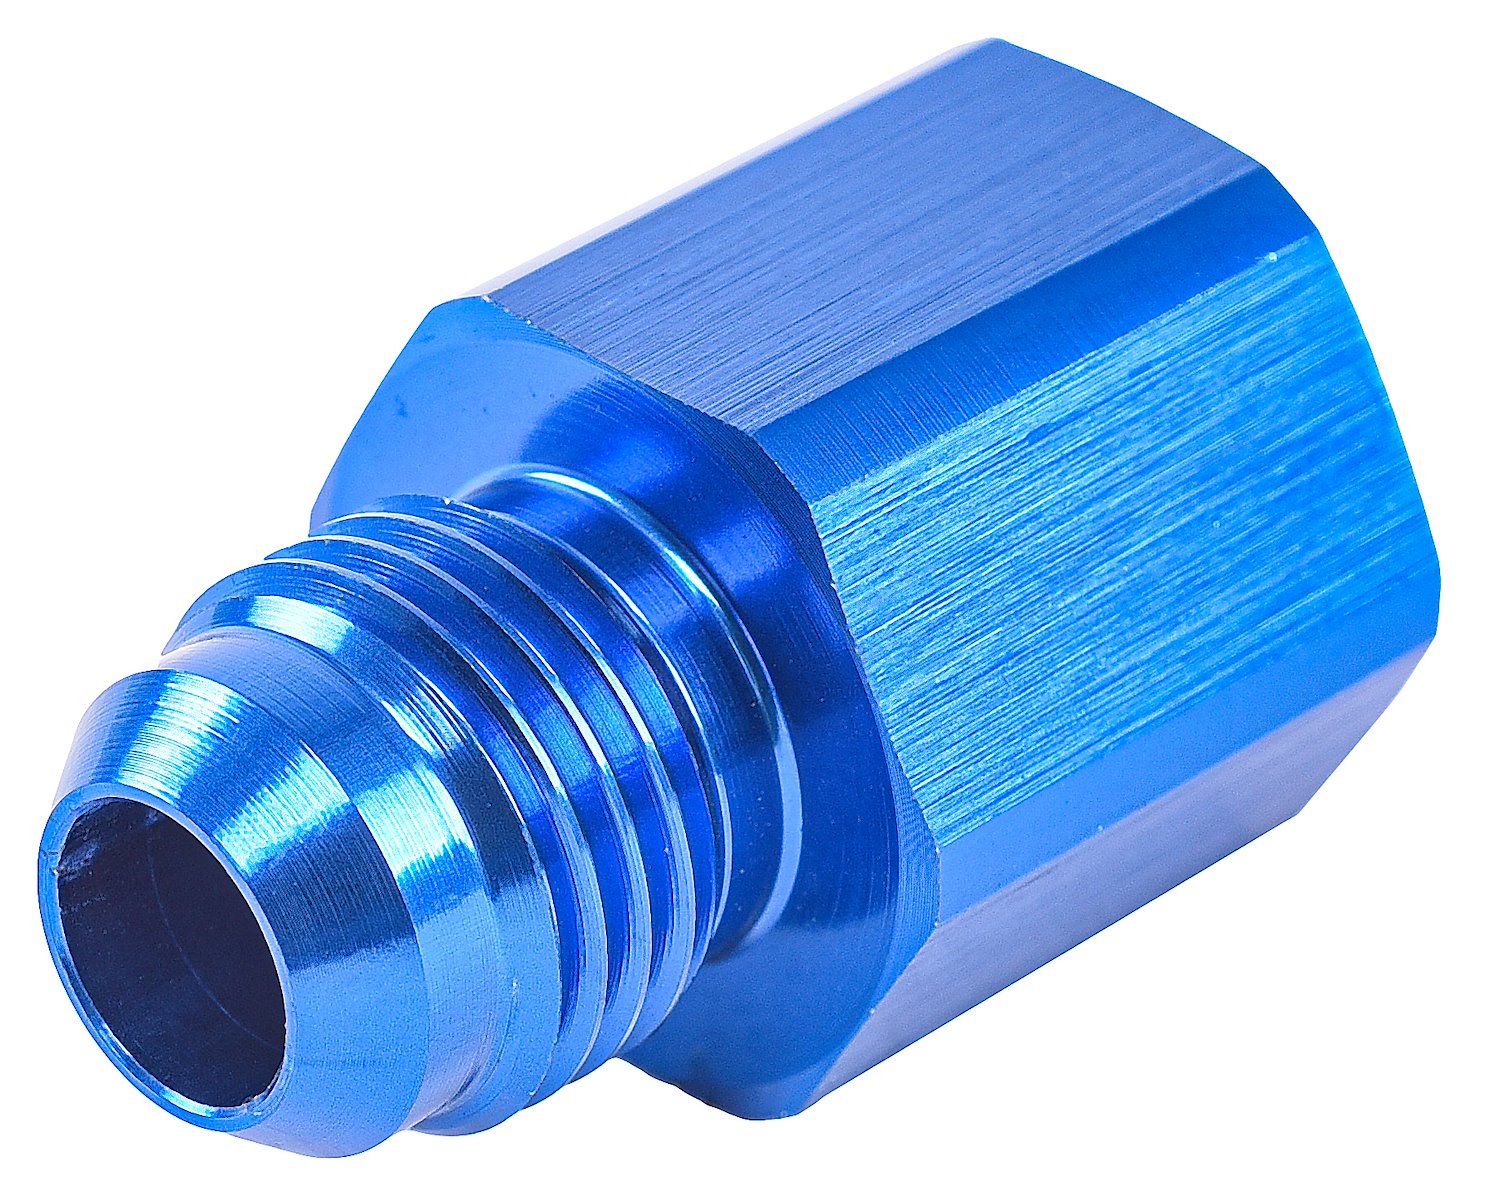 AN to Fuel Injection Adapter Fitting [-6 AN to 16mm x 1.5 Female Thread, Blue]